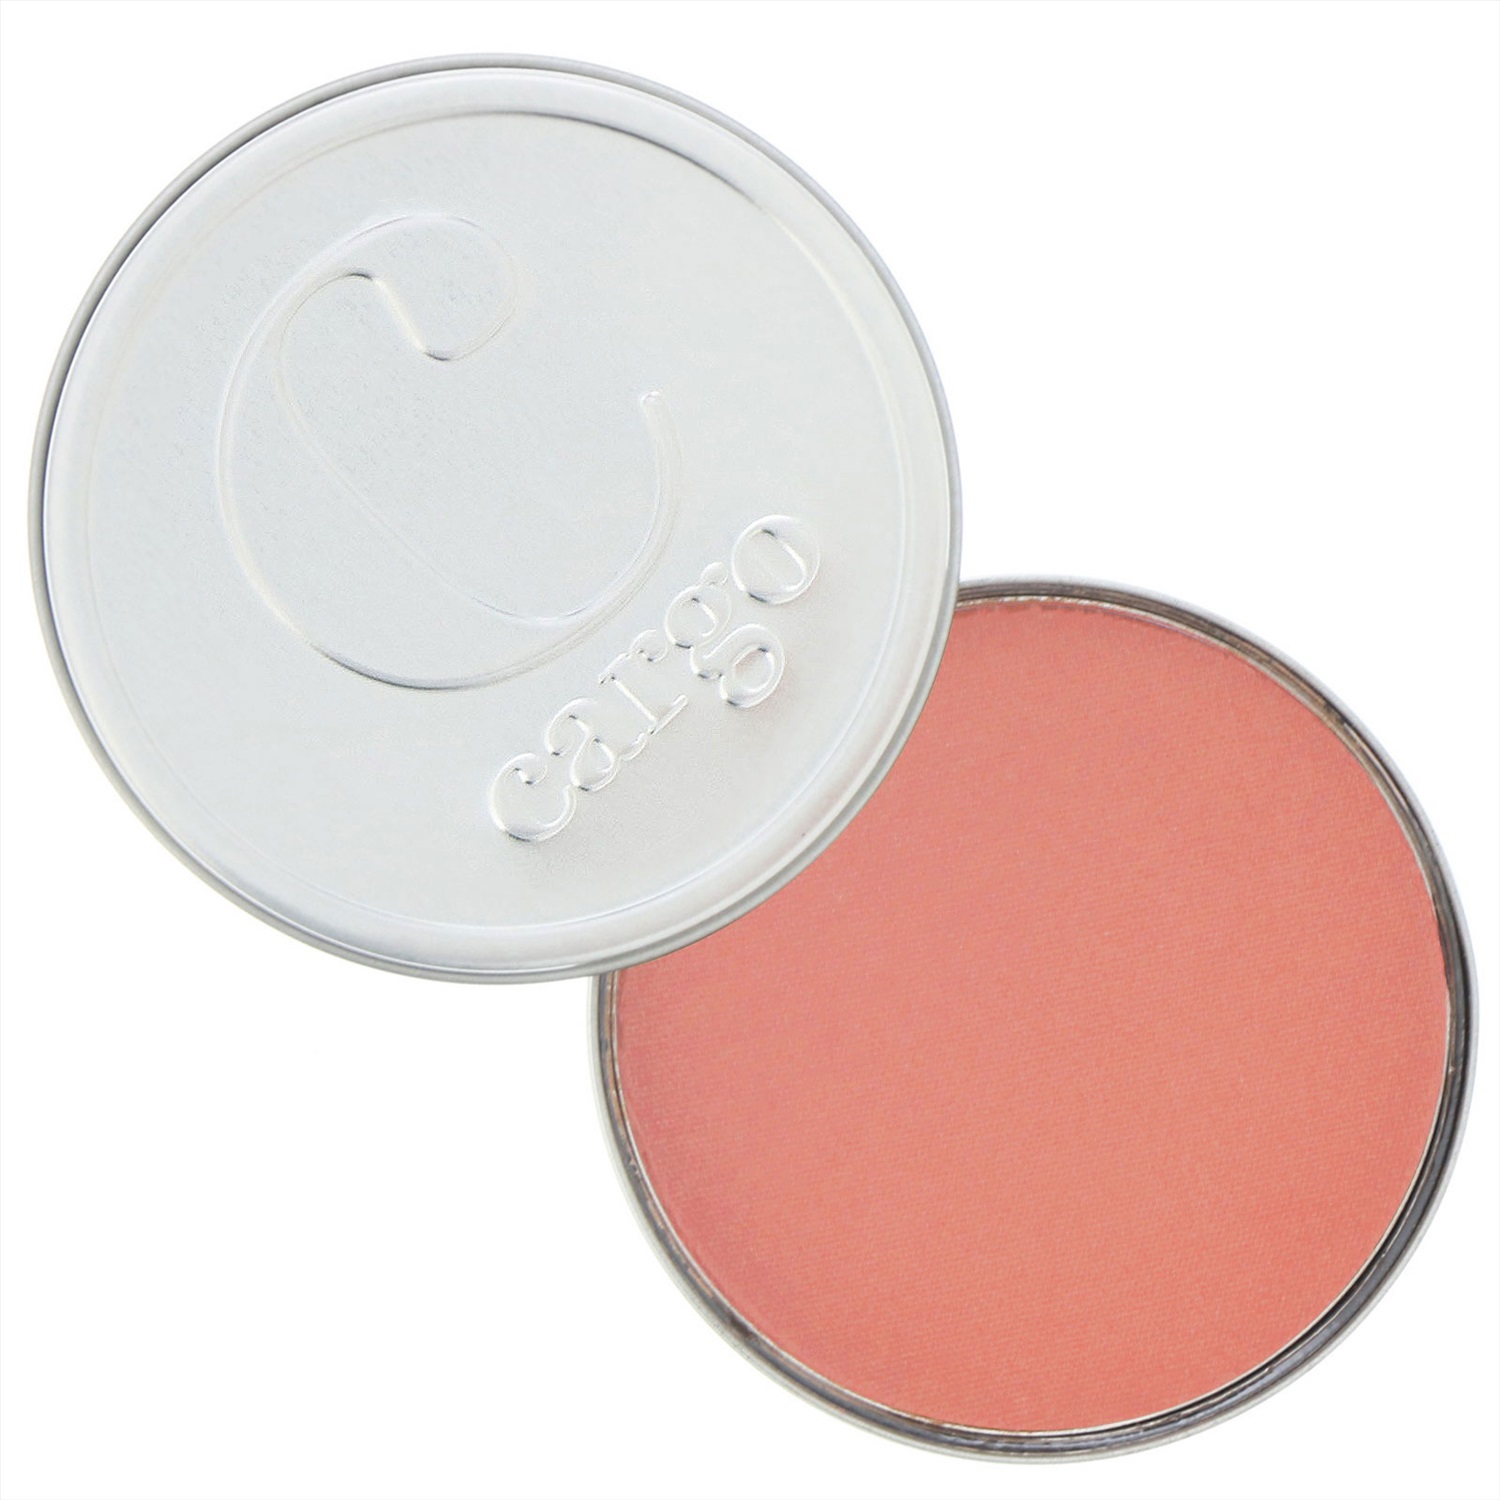 Cargo, Swimmables, Water Resistant Blush, Los Cabos, 0.37 oz (11 g) .